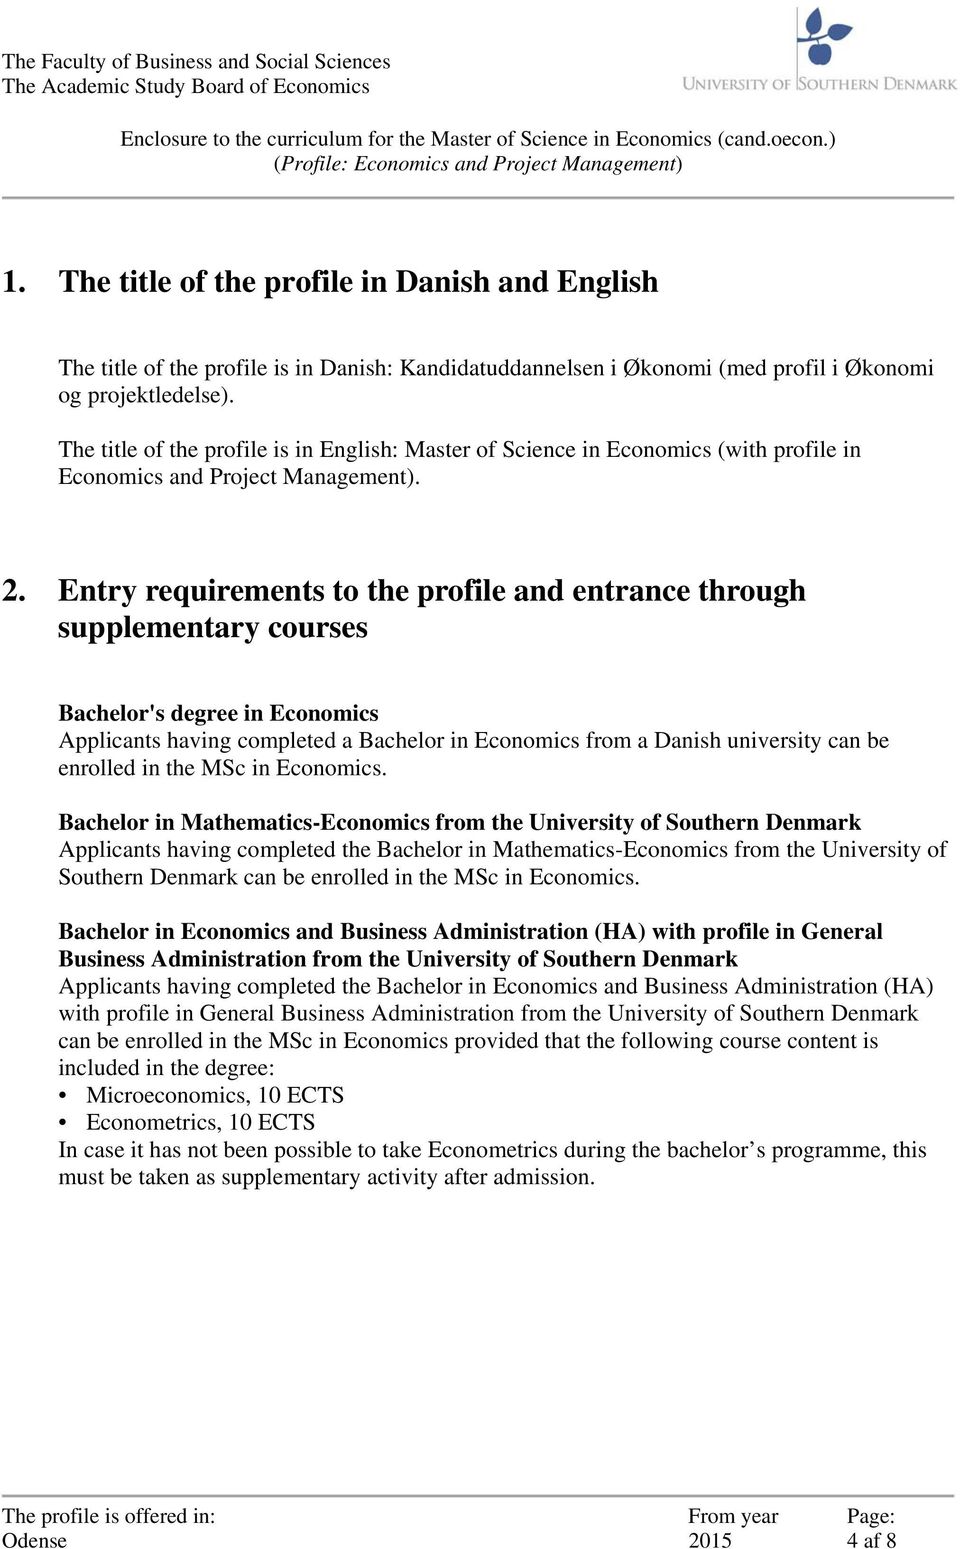 Entry requirements to the profile and entrance through supplementary courses Bachelor's degree in Economics Applicants having completed a Bachelor in Economics from a Danish university can be